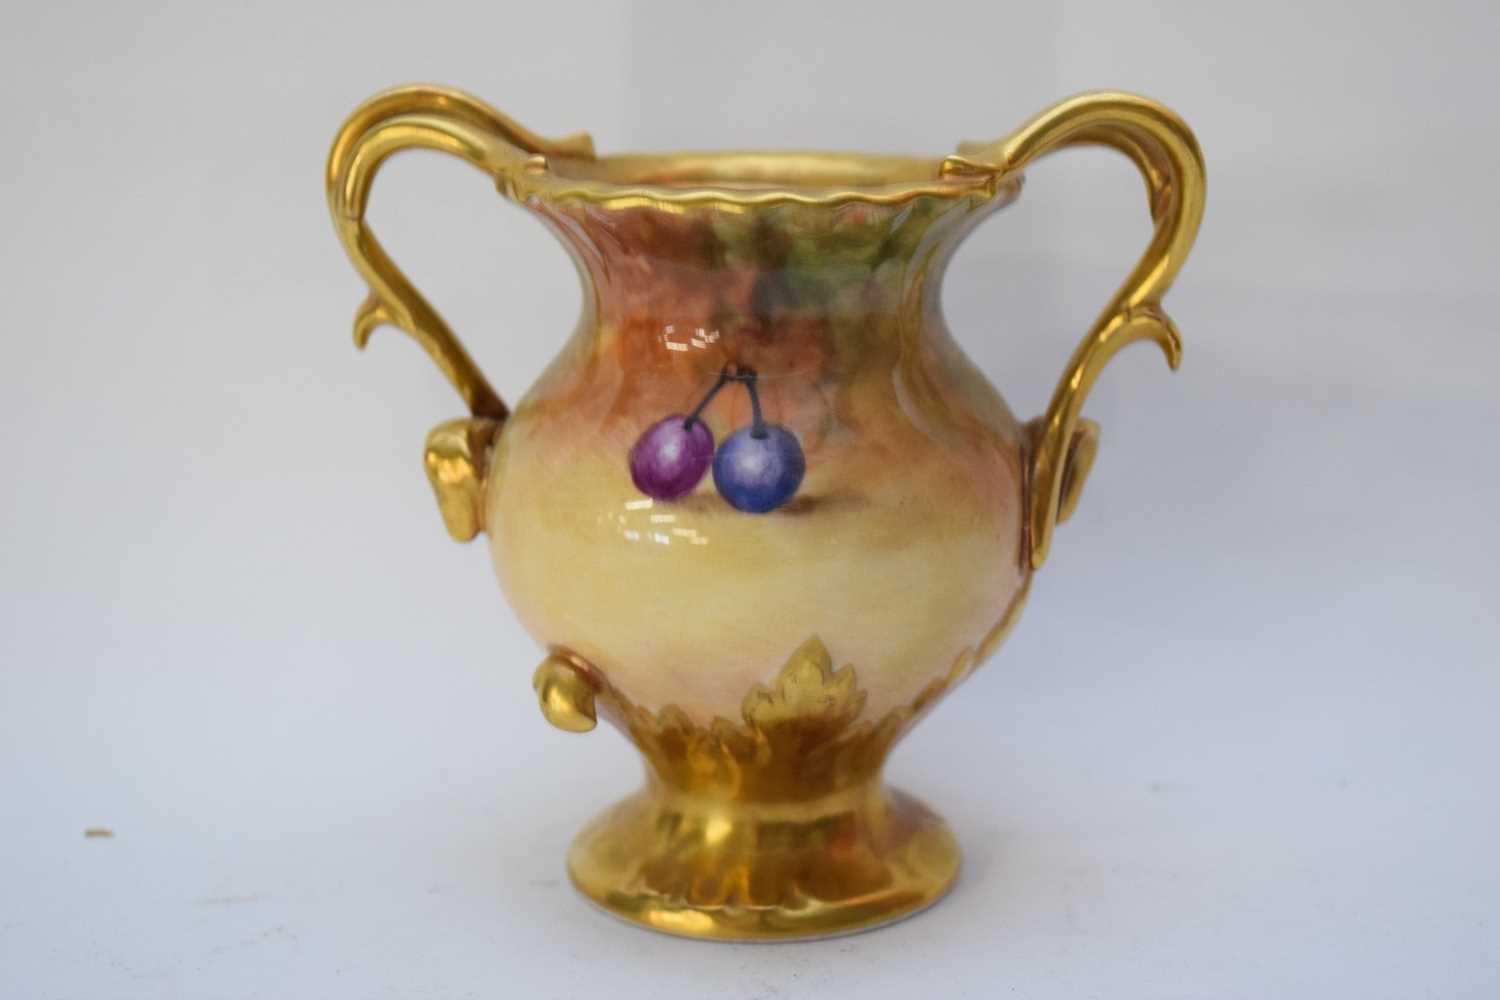 Coalport vase with gilt handles painted with fruit, signed by N Lear - Image 4 of 6